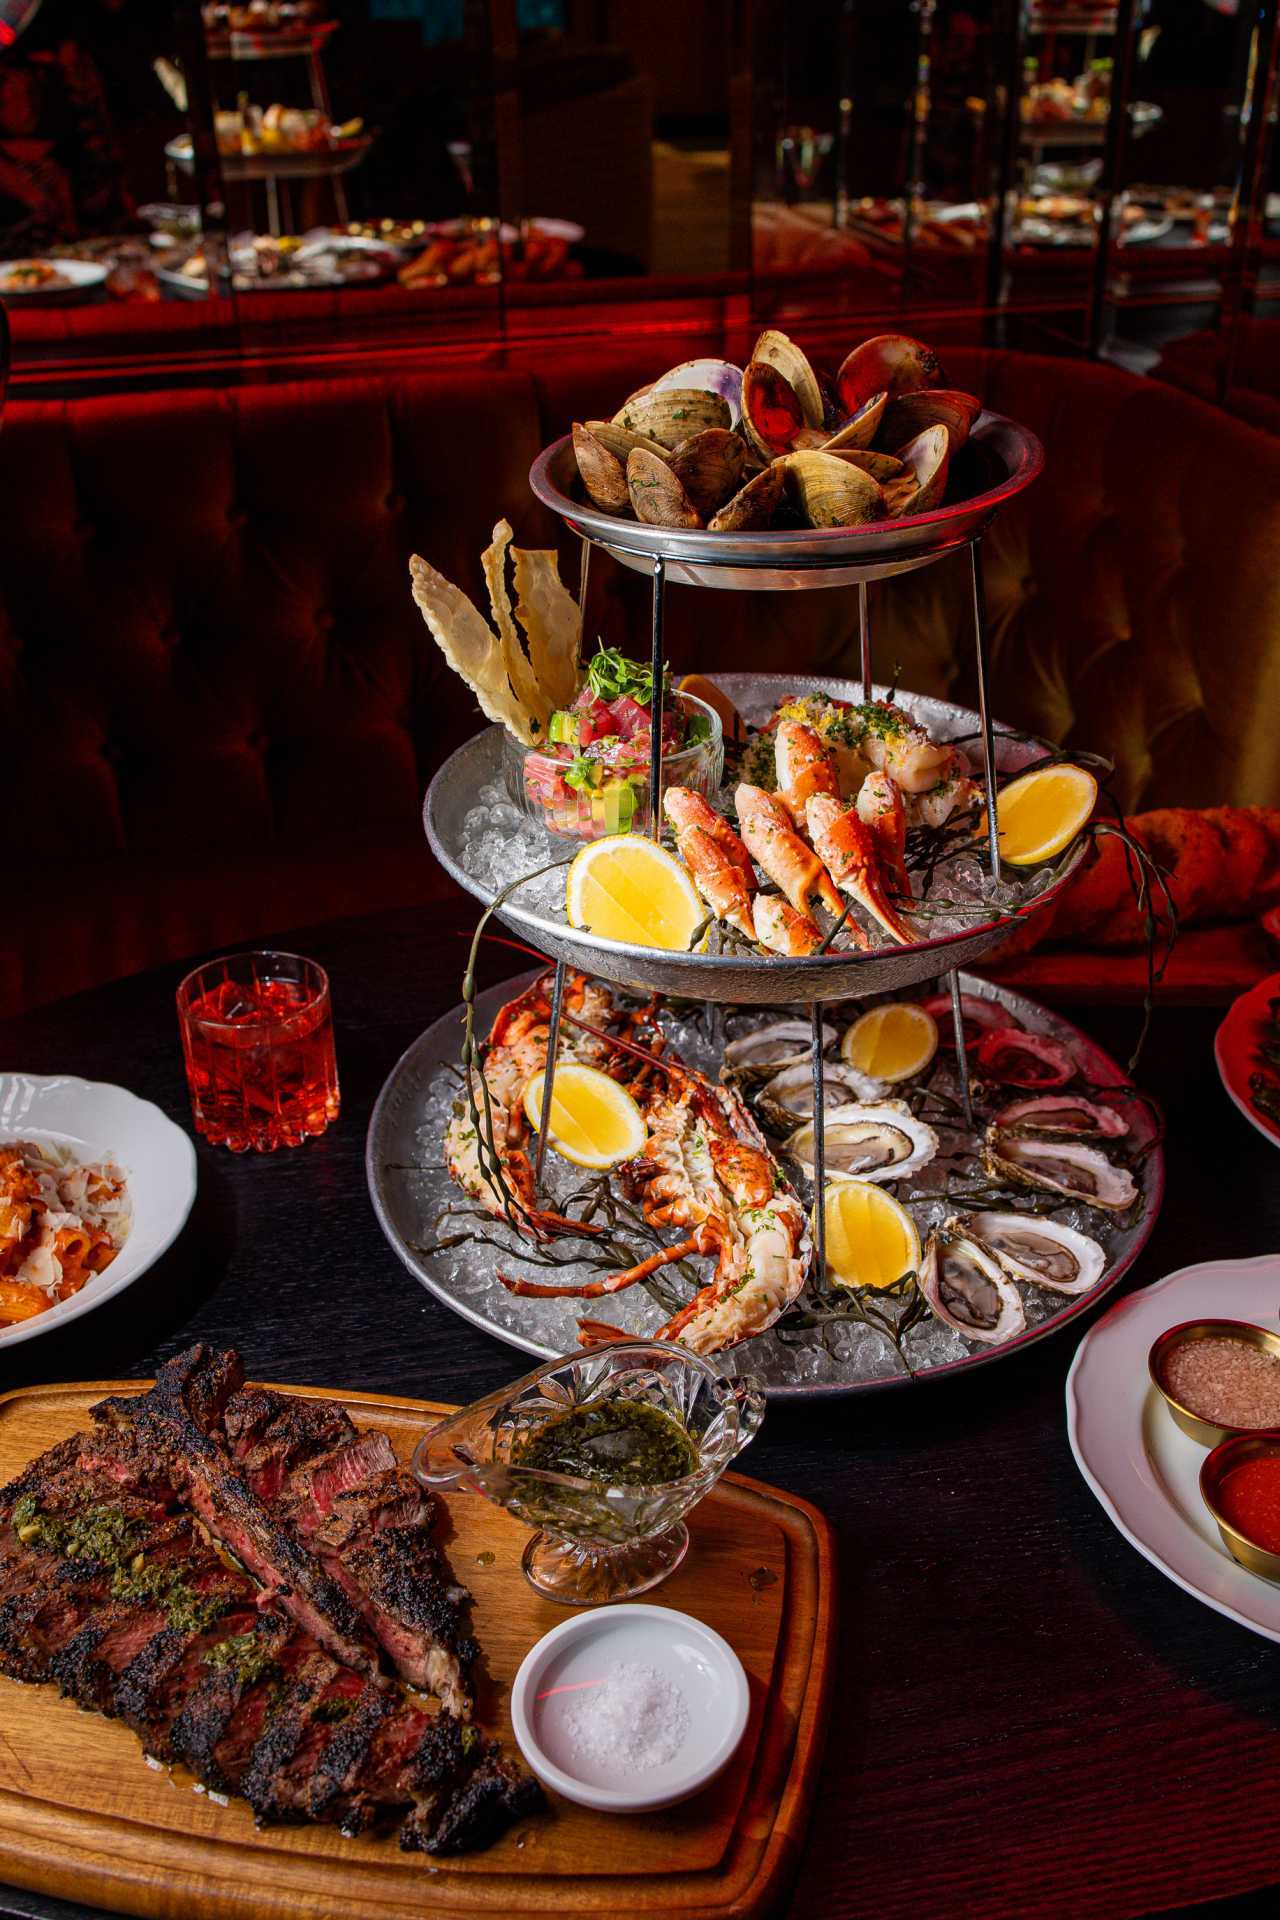 Romantic restaurants in Toronto | A seafood tower and a steak at Maxime's restaurant in Toronto